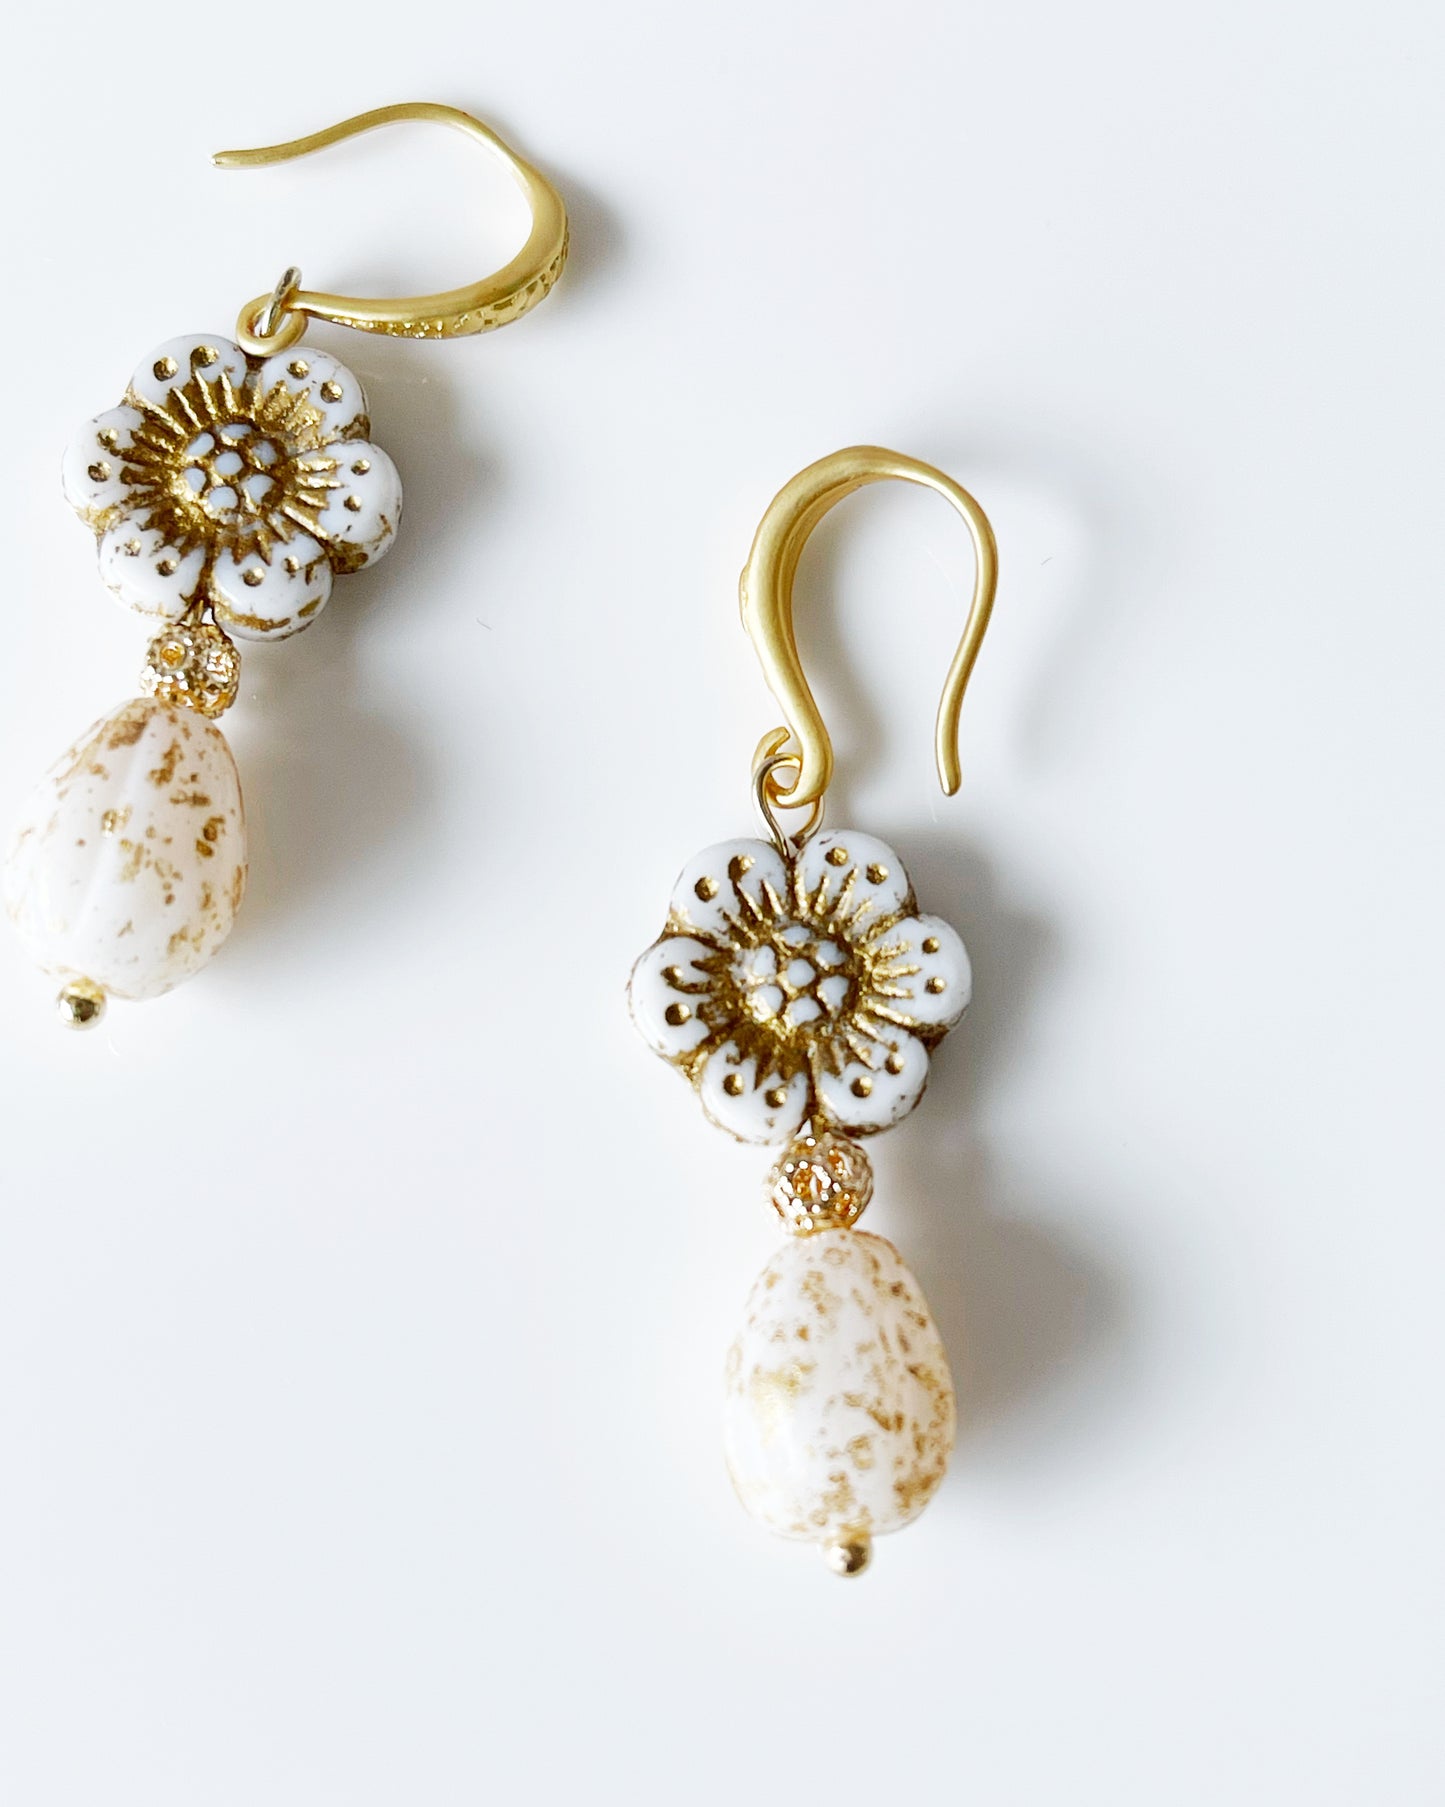 My first wedding heirloom Victorian flowers and tear drop glass earrings in antique white